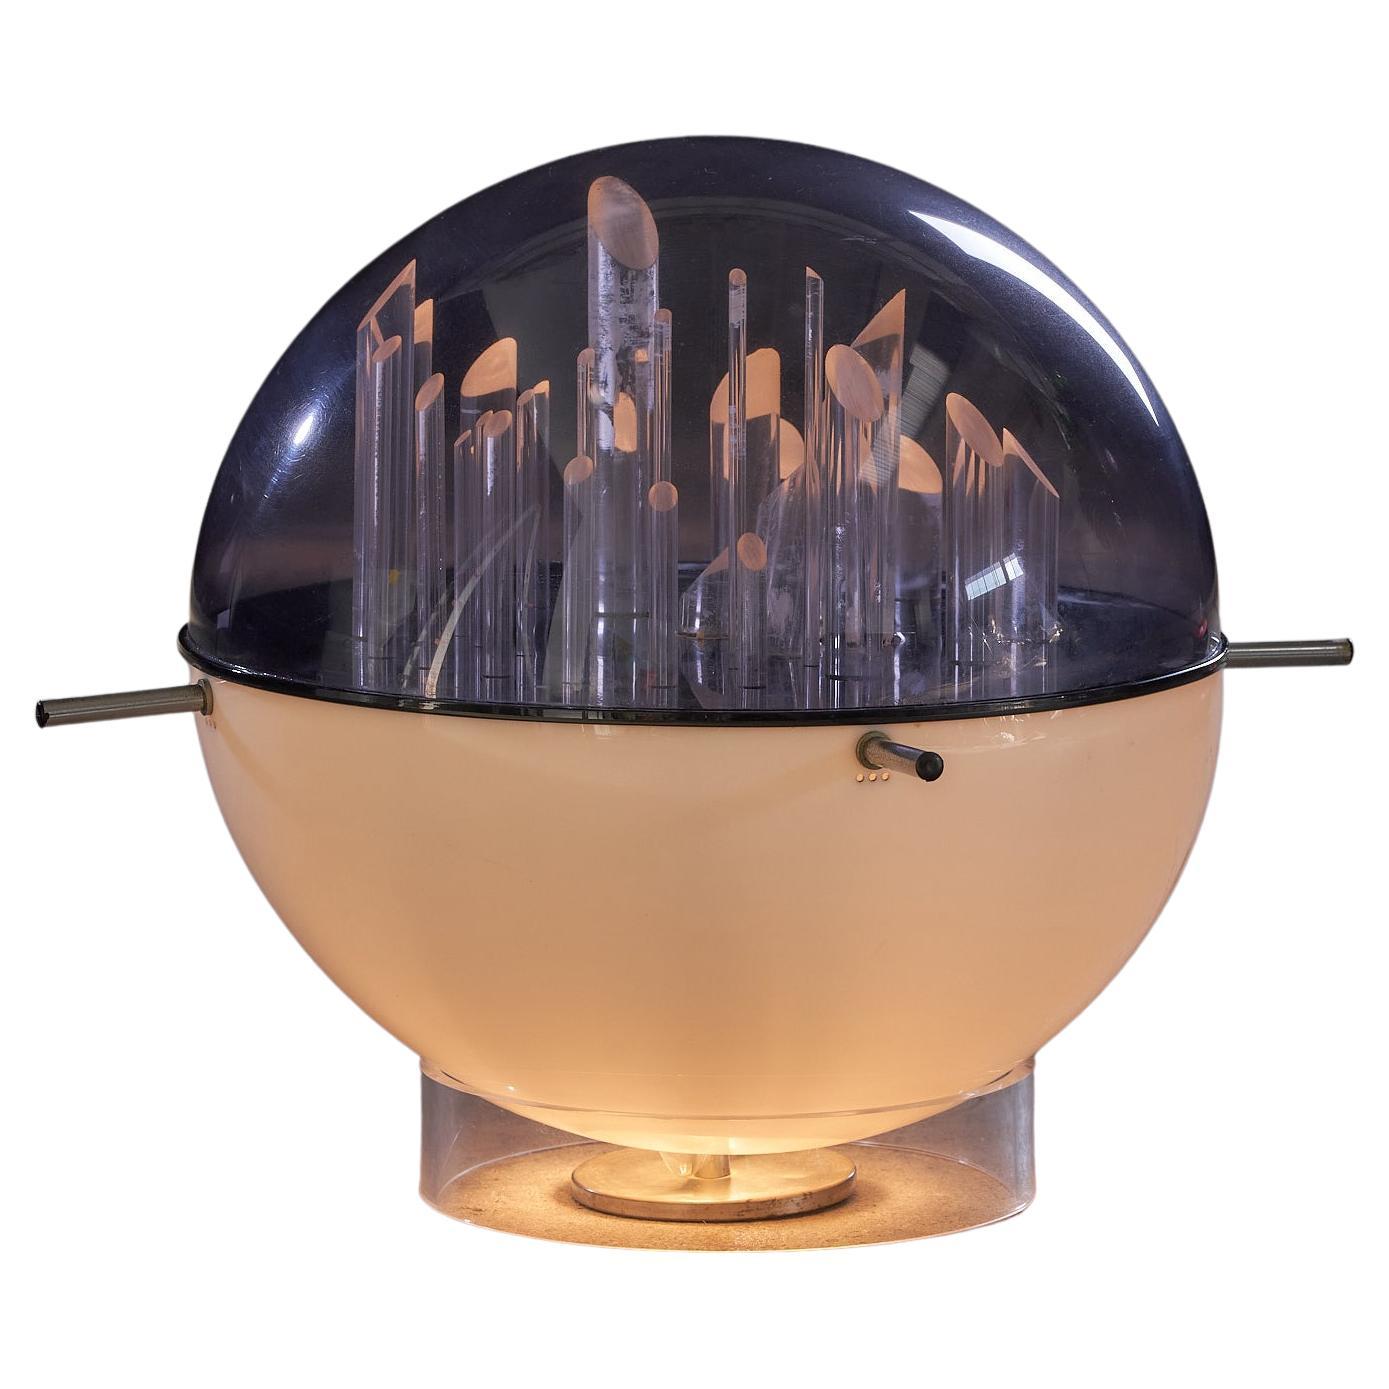 Space Age Lucite and Metal Sculpture Lamp by Gaetano Missaglia, Italy, 1970s For Sale